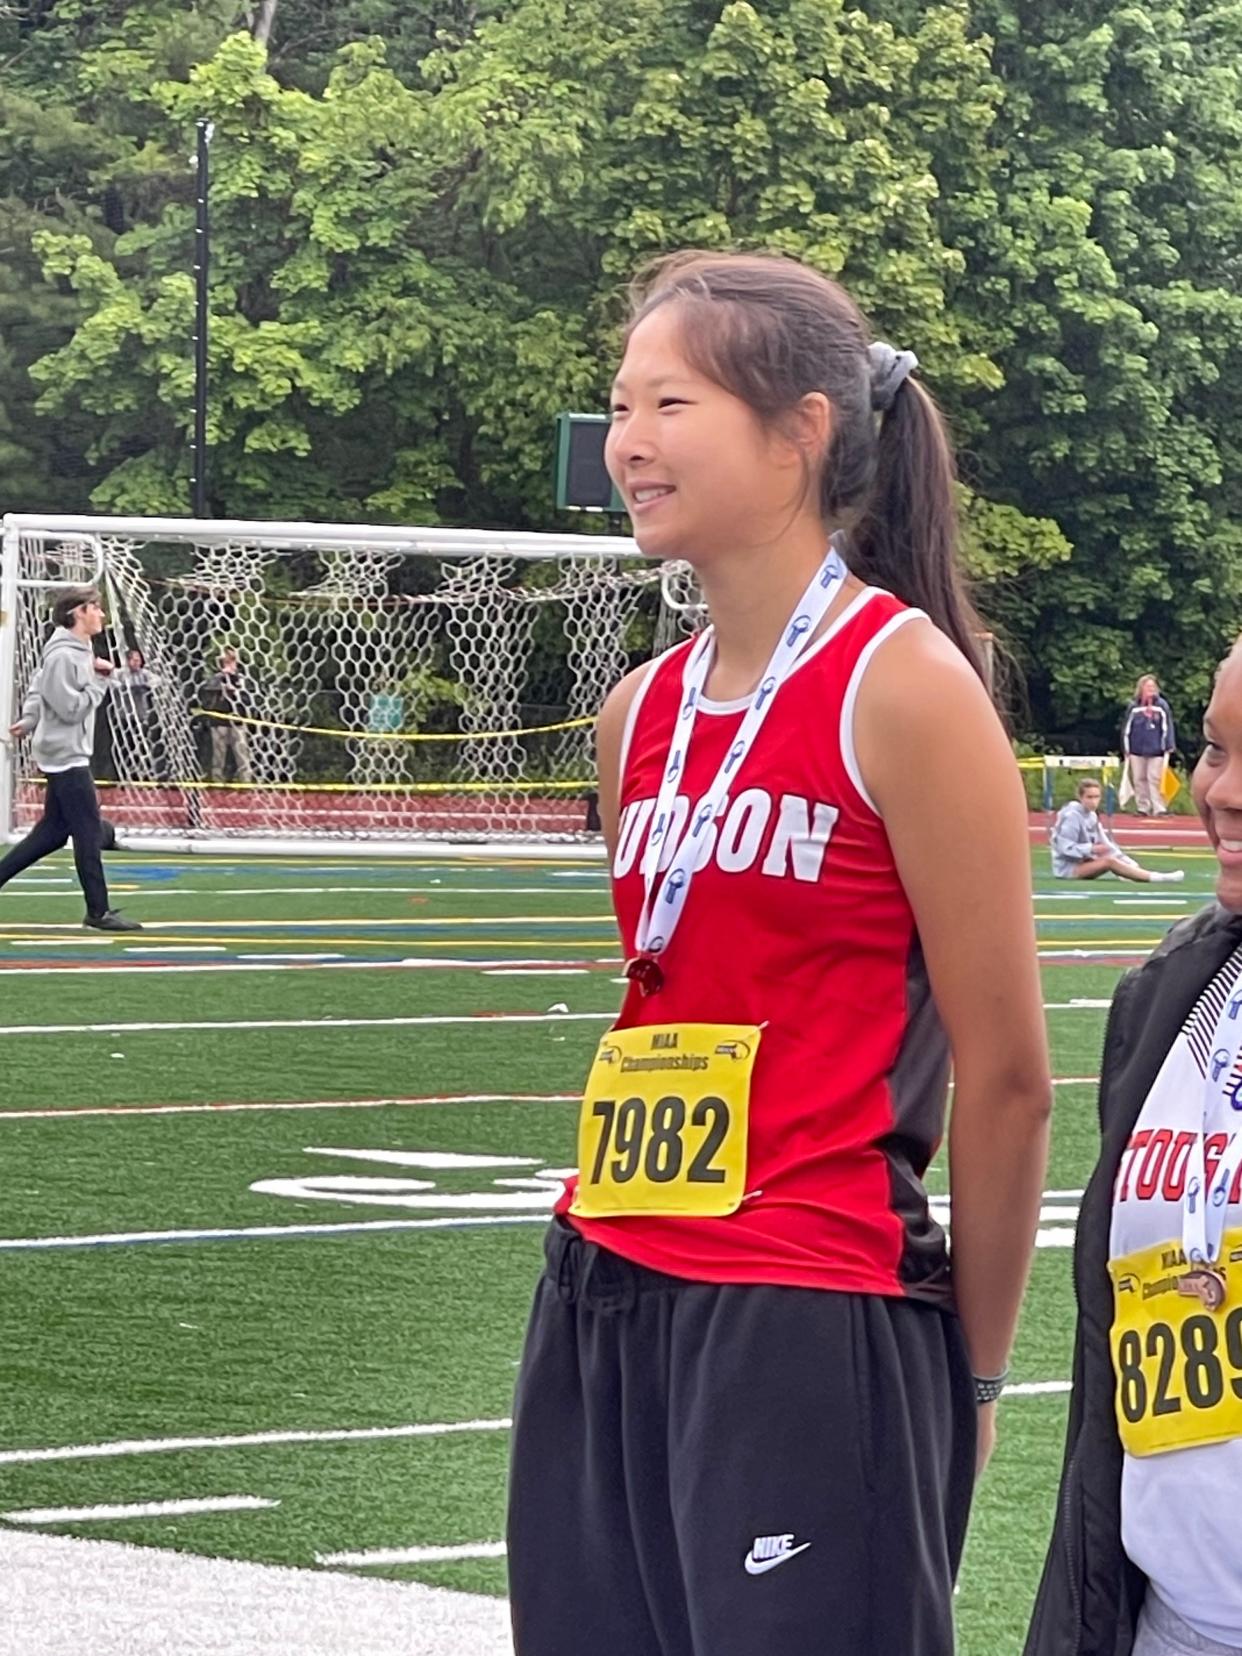 Hudson’s Savannah Gao displays the third-place javelin medal she won at Saturday’s Meet of Champions in Fitchburg.